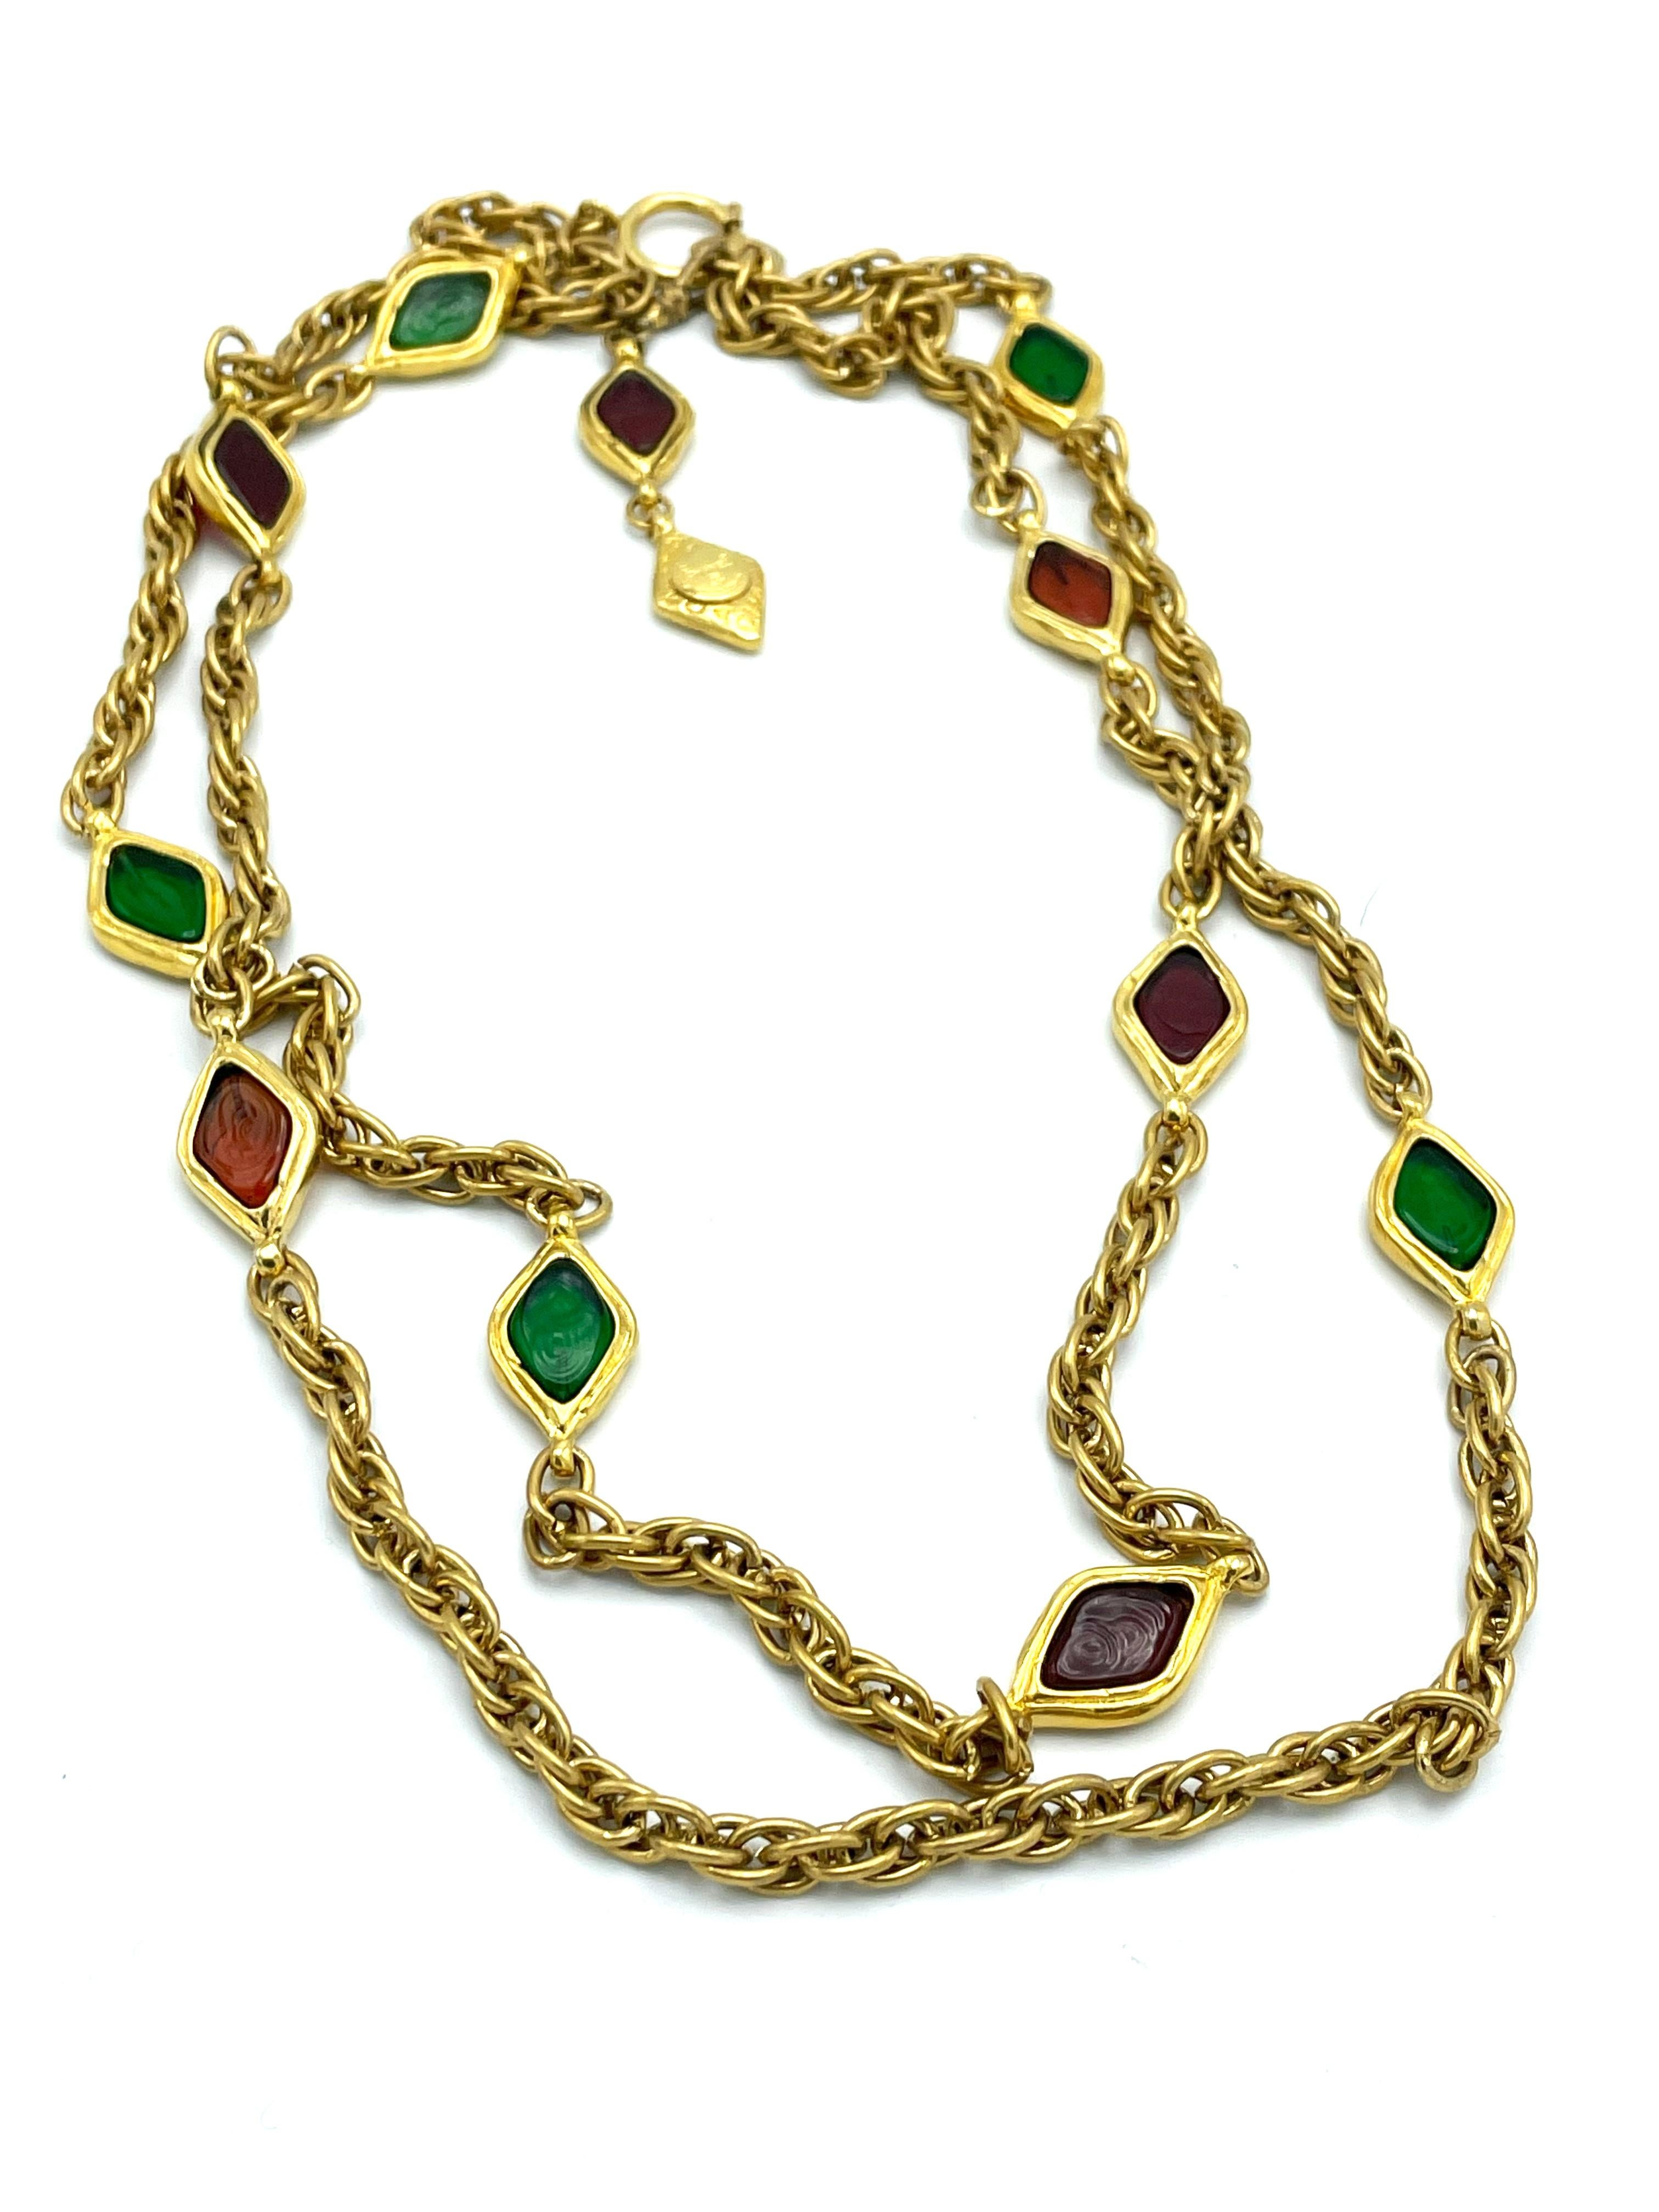  2 row Chanel necklace with red and green pate the verre, gold plated, 1970/80's For Sale 3